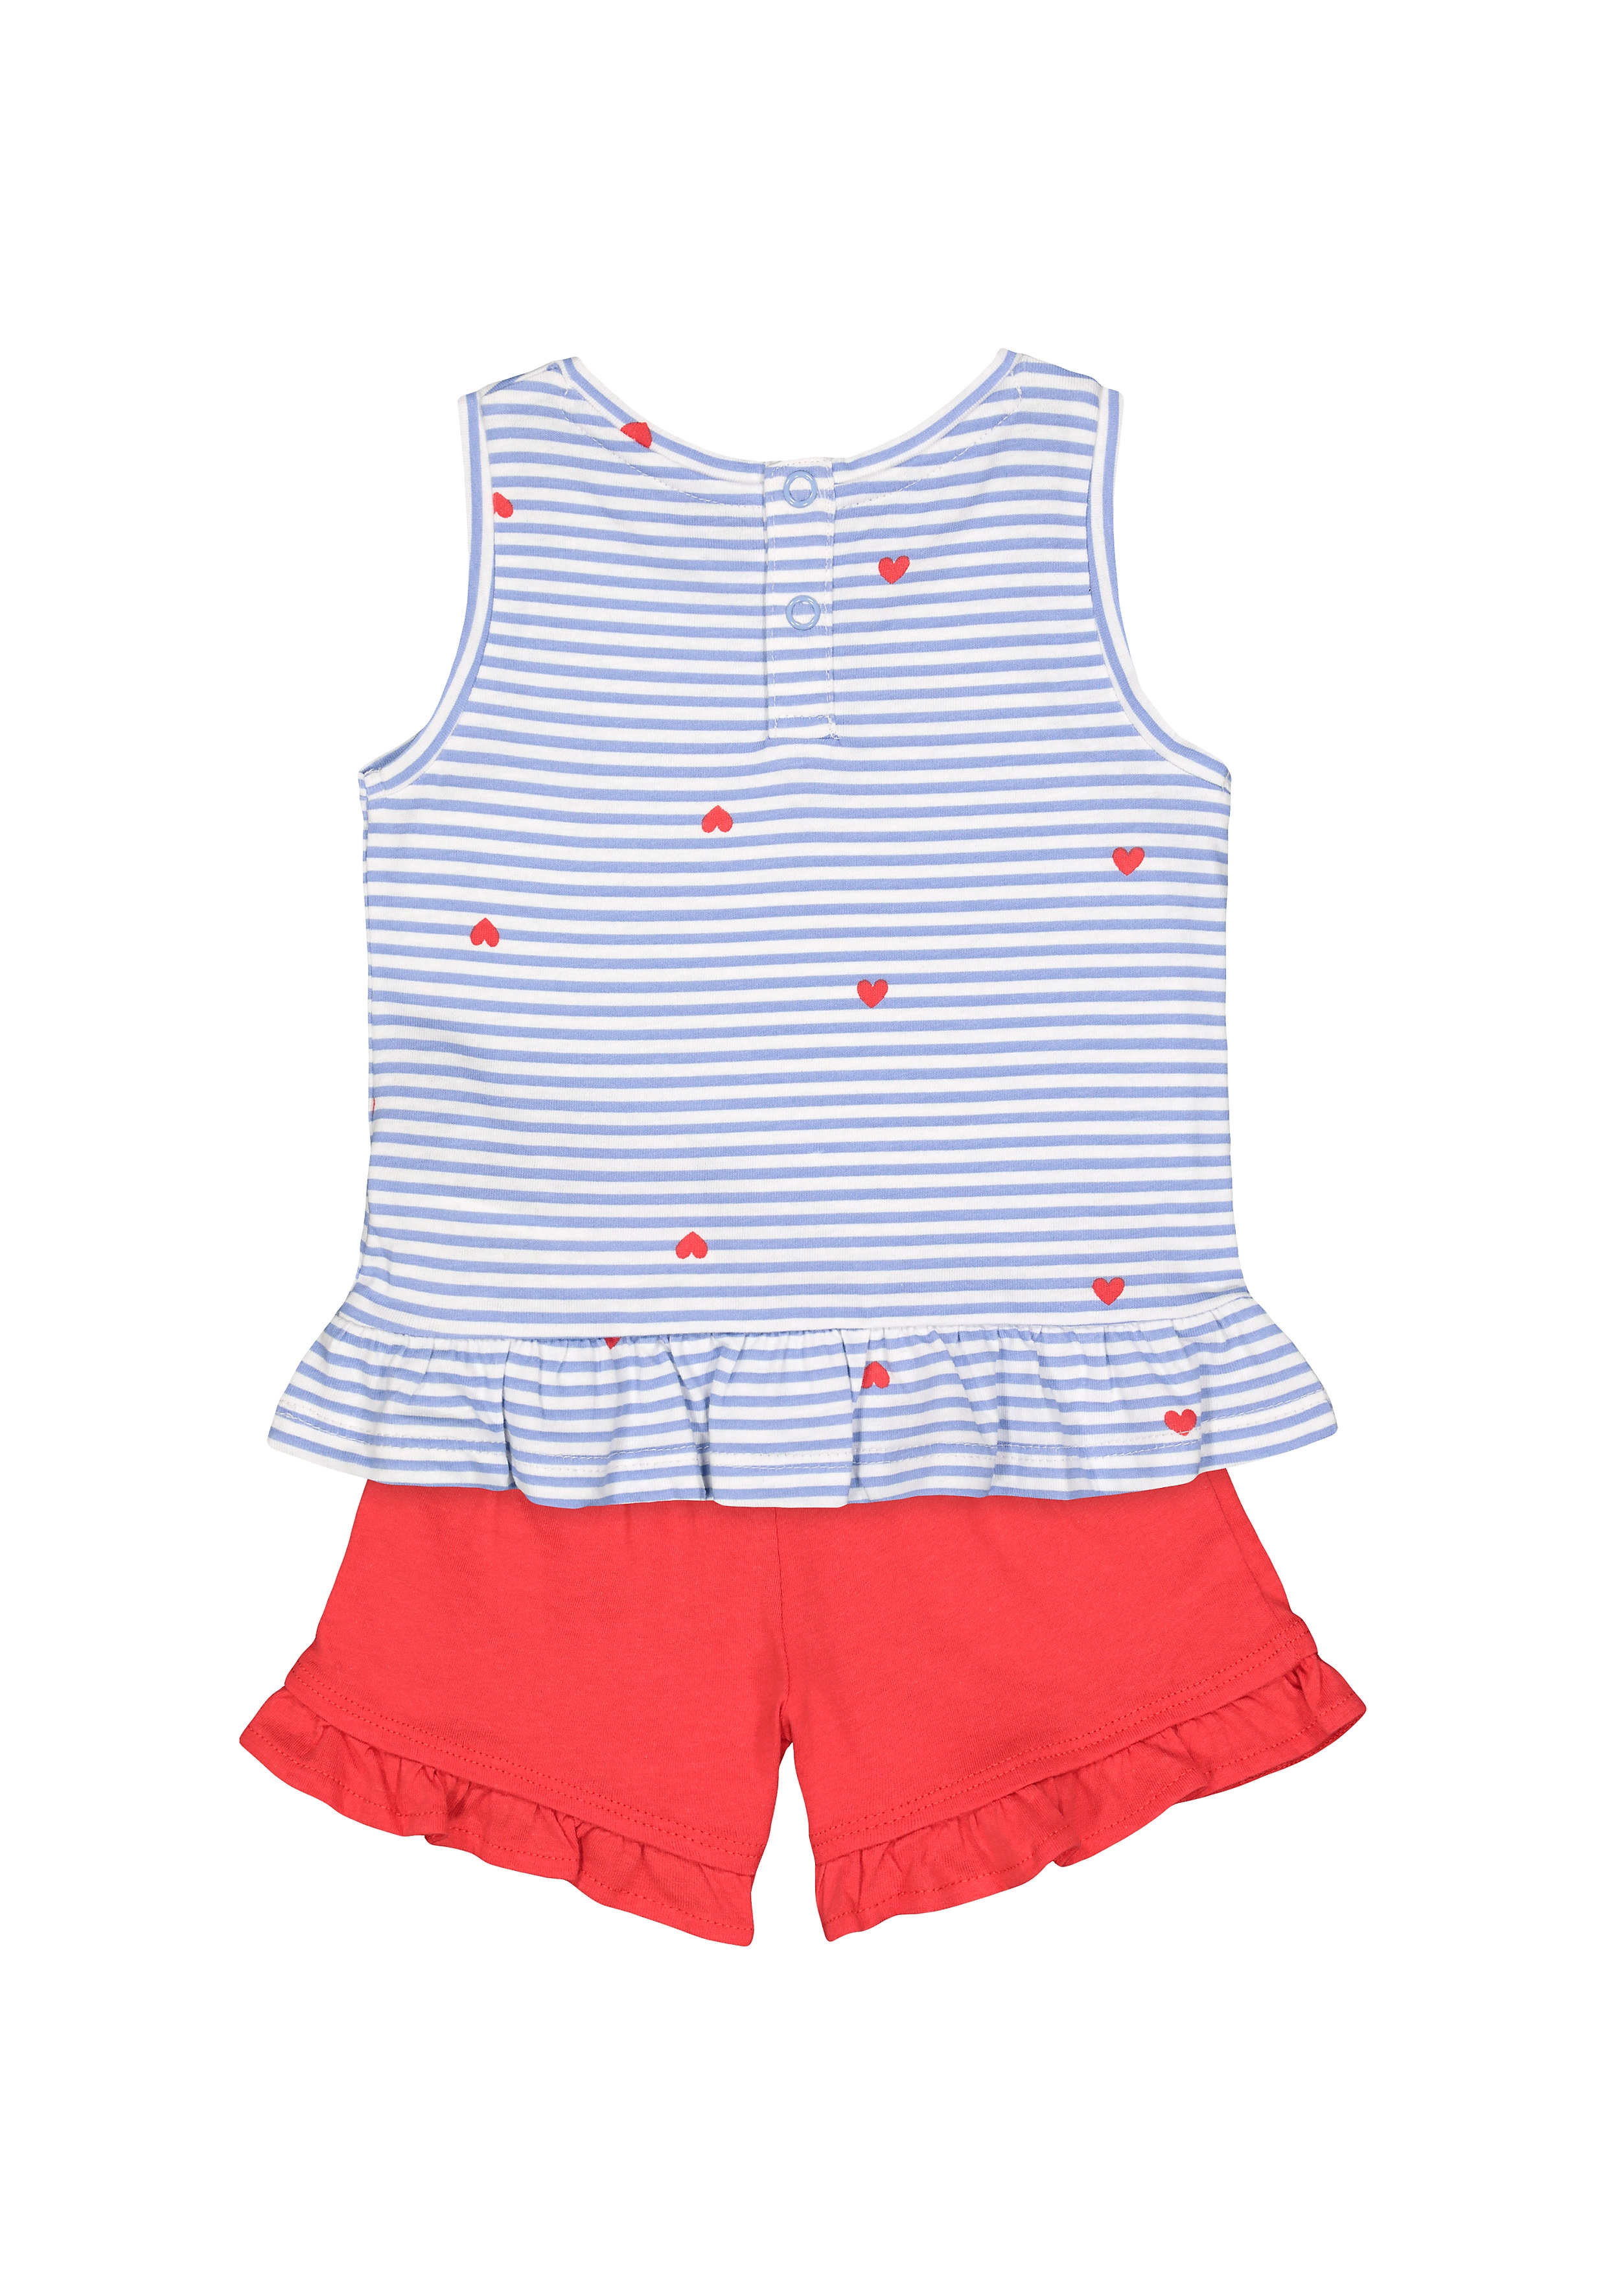 Girls Sleeveless T-Shirt And Shorts Set Stripes And Heart Print - Blue Red